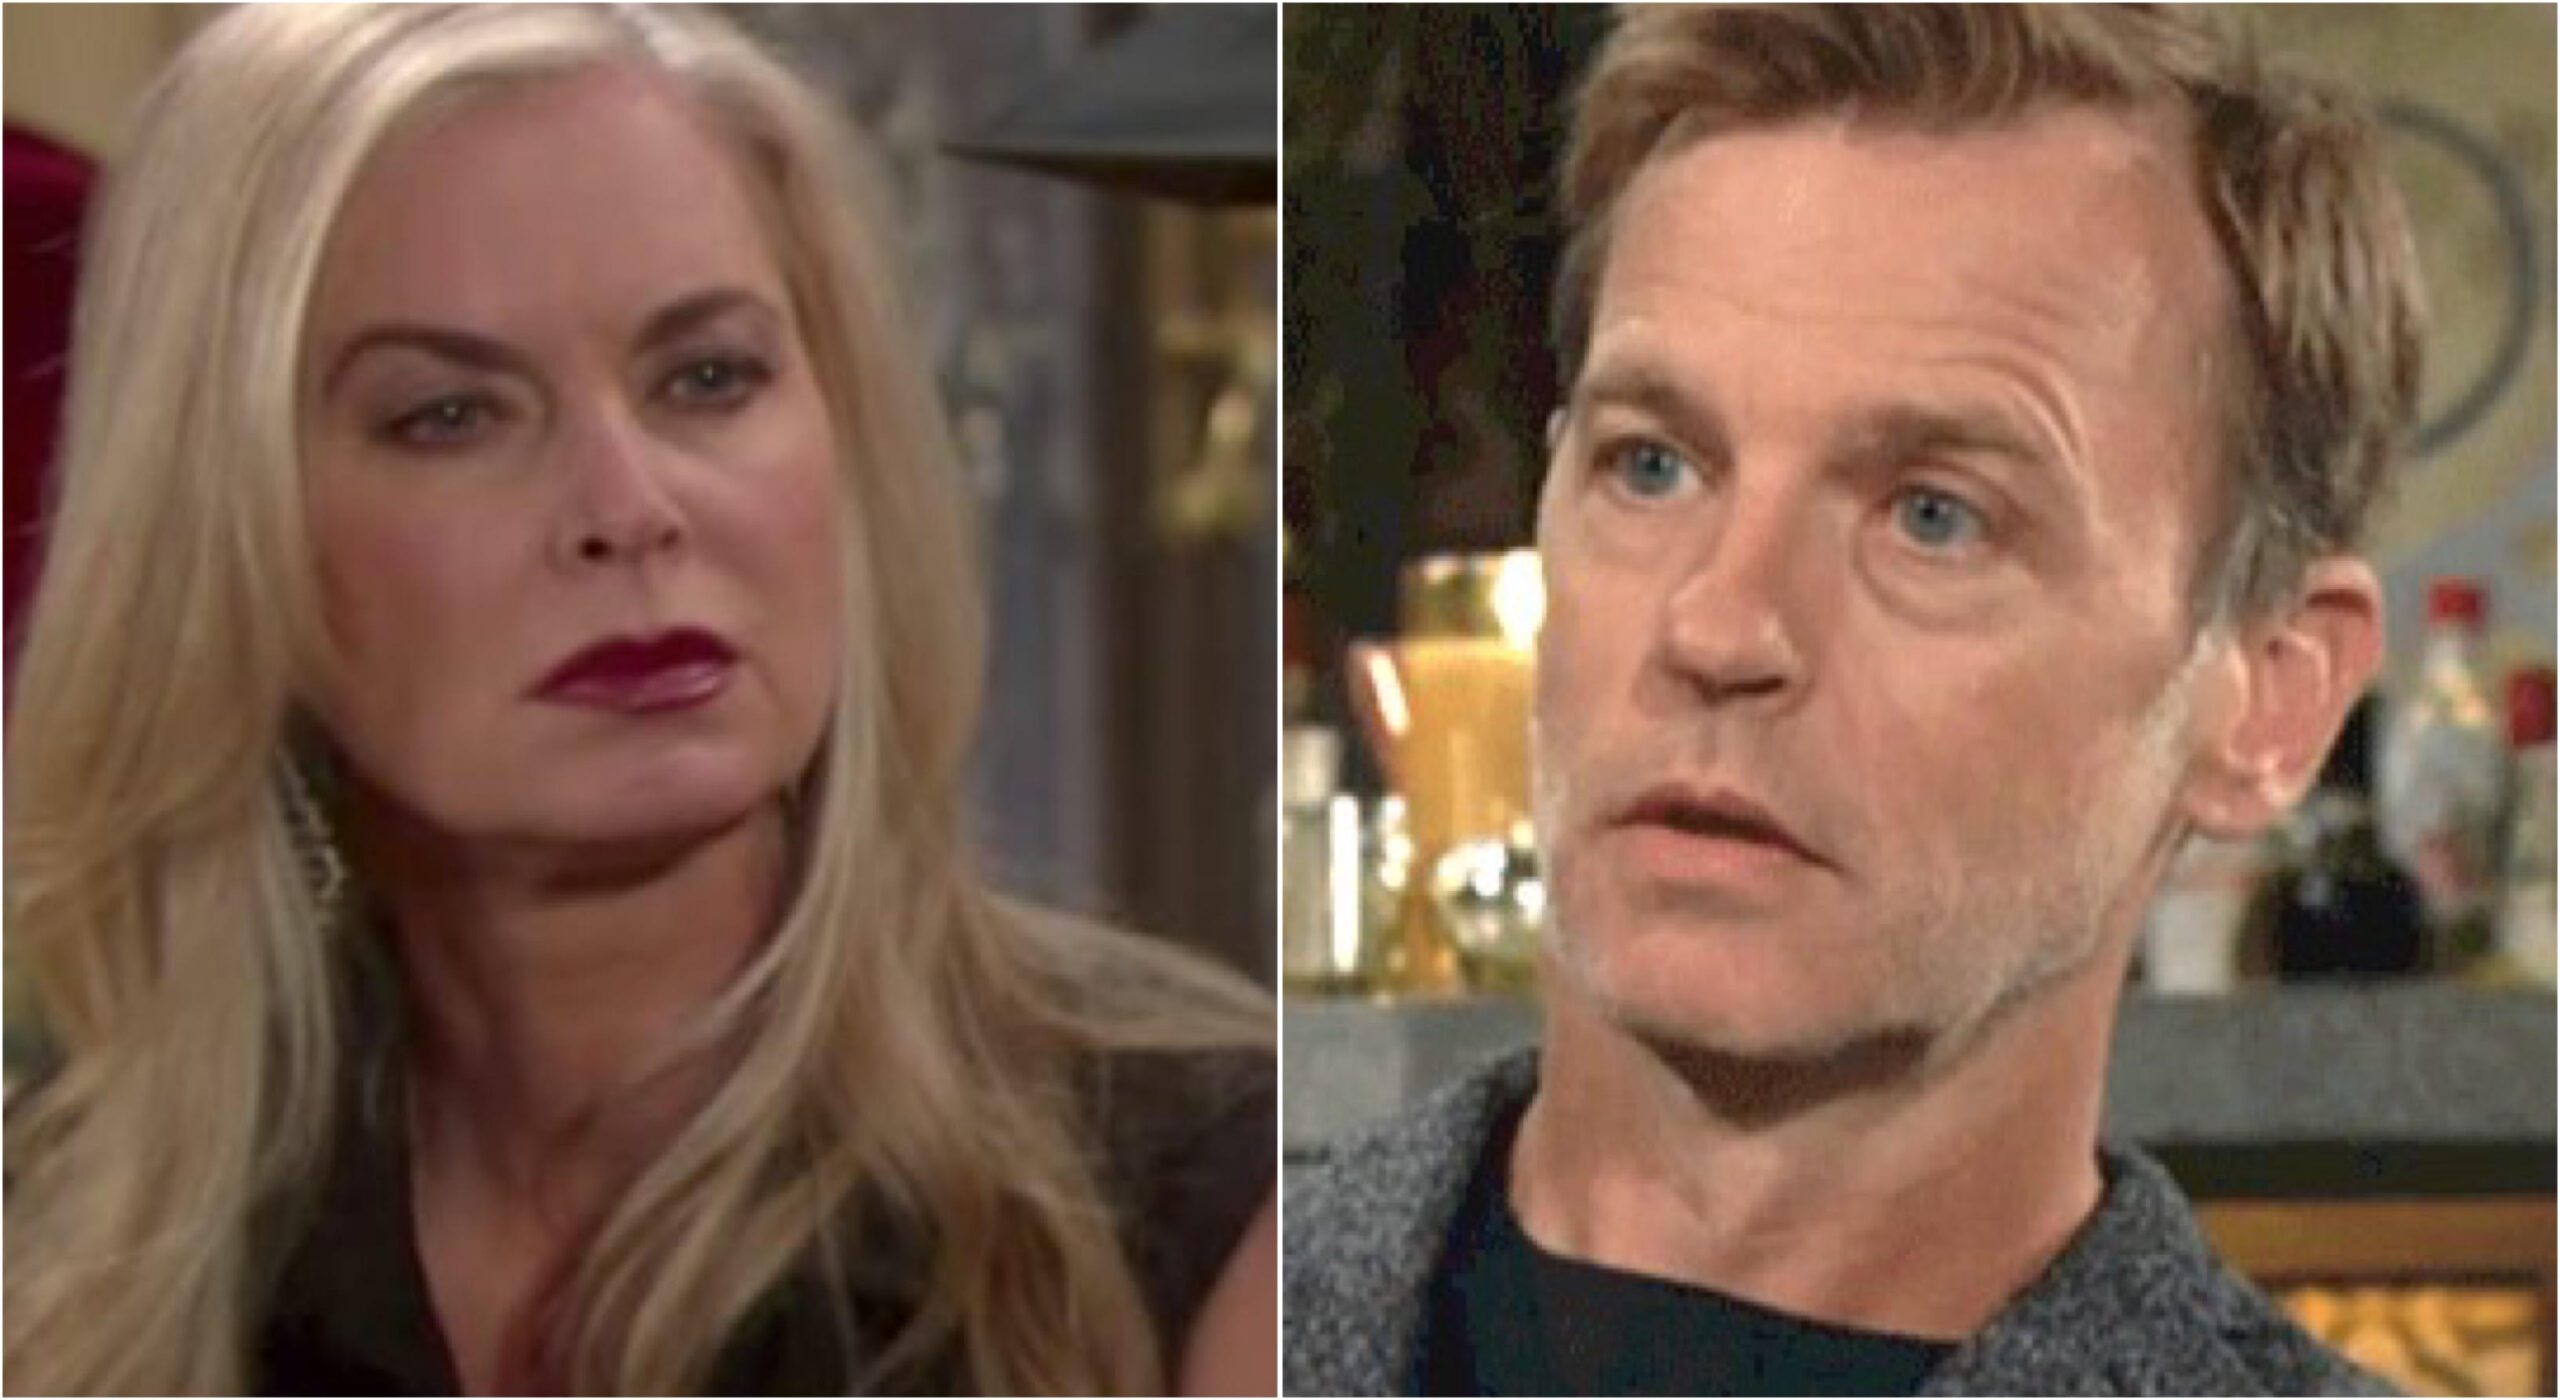 The Young and the Restless spoilers featuring Ashley Abbott Tucker McCall